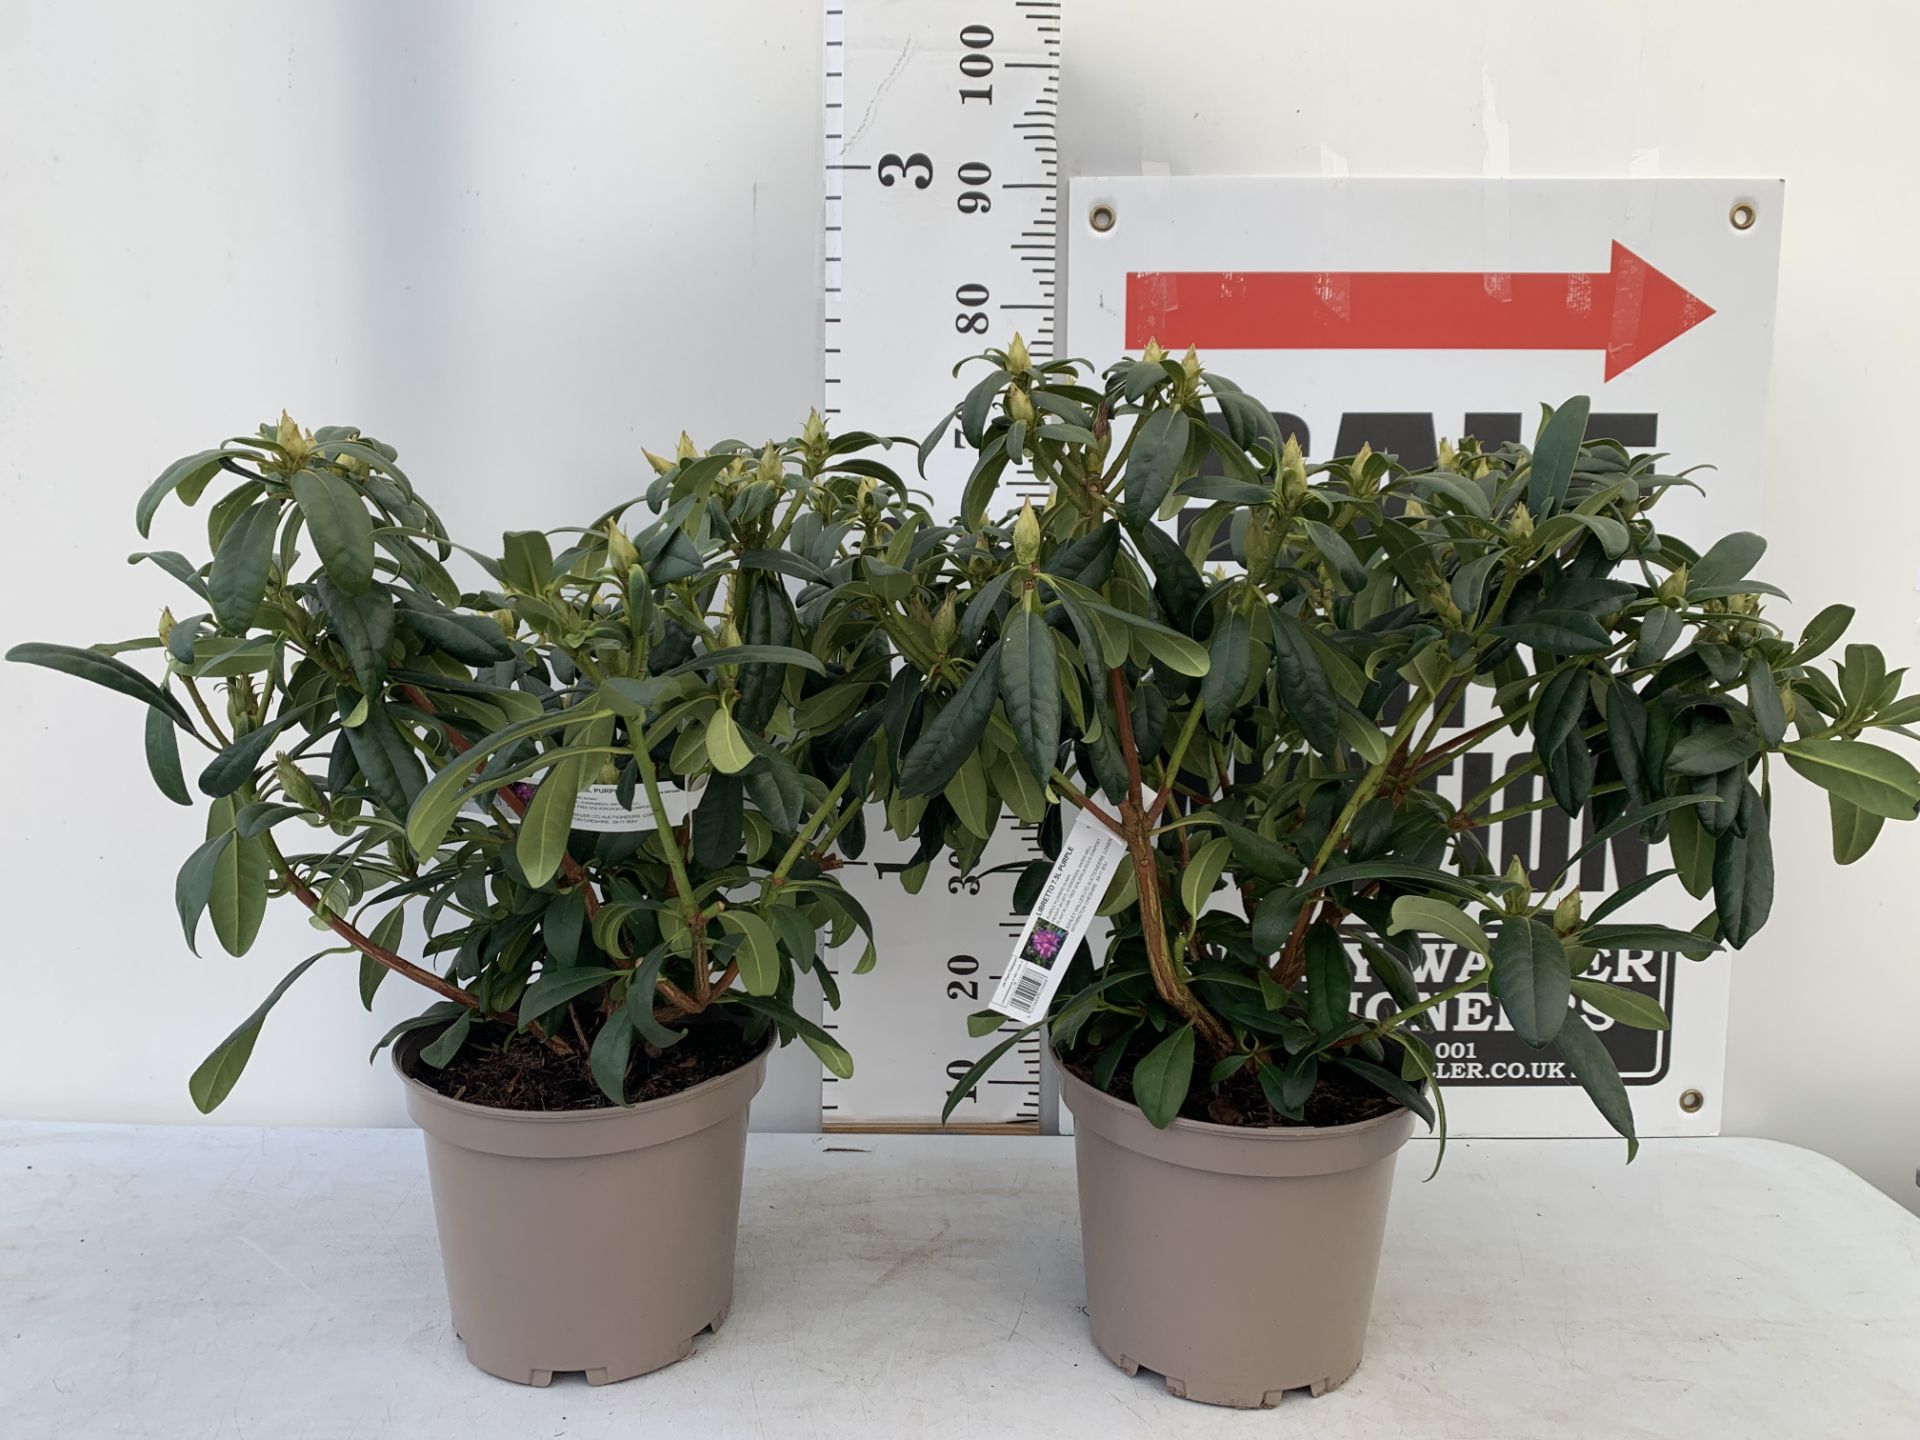 TWO RHODODENDRONS LIBRETTO PURPLE IN 7.5 LTR POTS APPROX 70CM IN HEIGHT PLUS VAT TO BE SOLD FOR